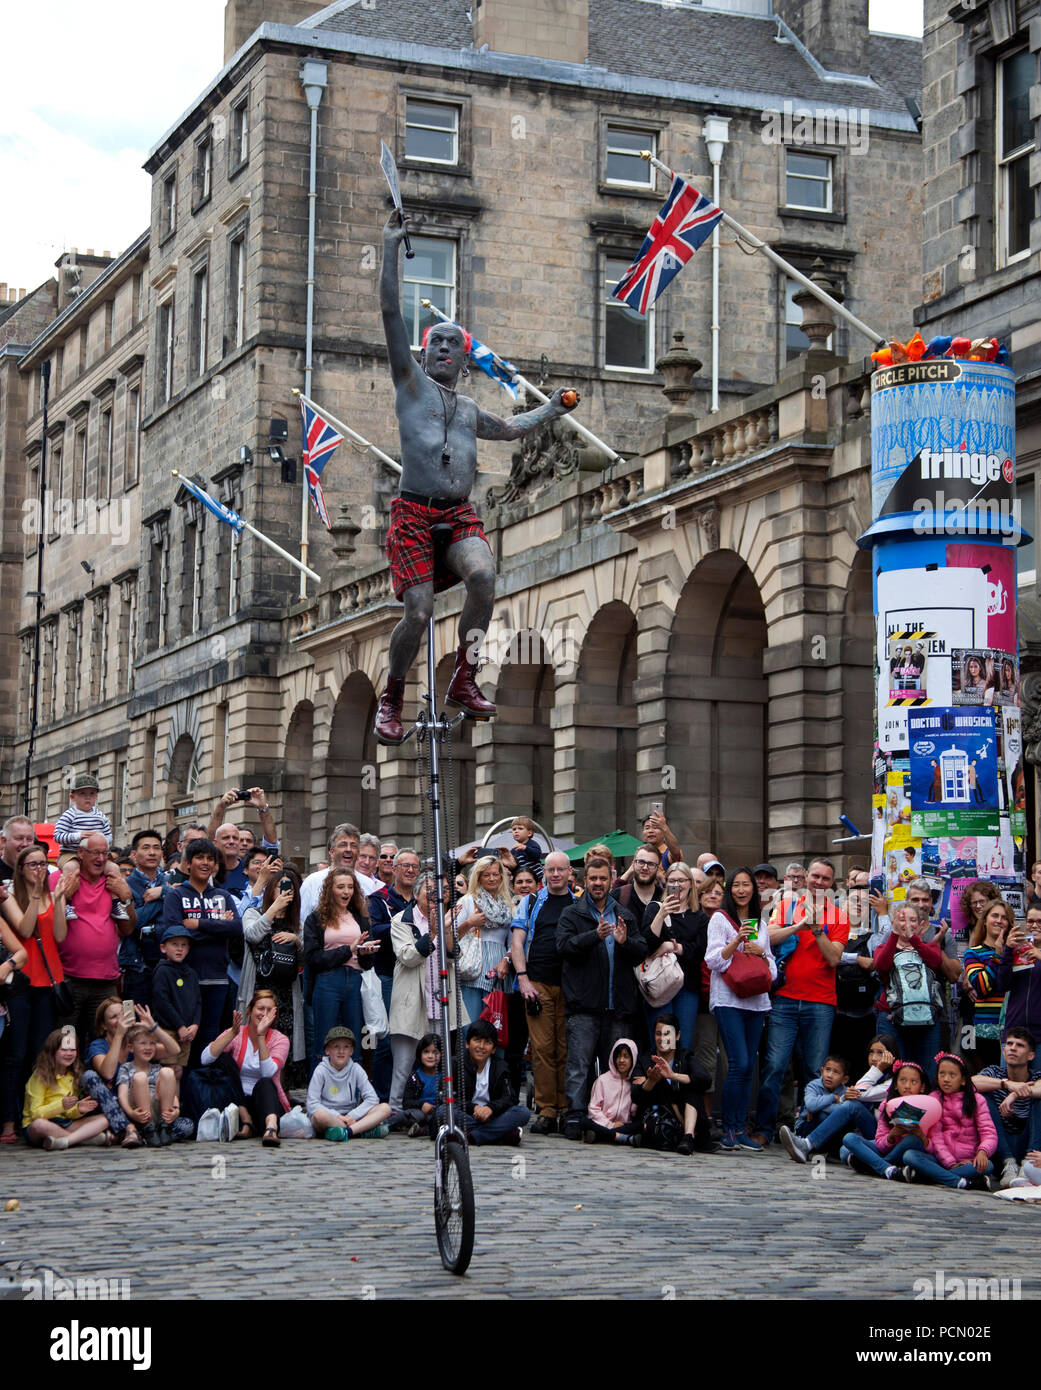 Opening day of 2018 Edinburgh Fringe Festival, Scotland UK, 3 Aug.2018. Big audiences for the street performers on the city's Royal Mile for the first day of the 2018 Edinburgh Fringe Festival. Stock Photo